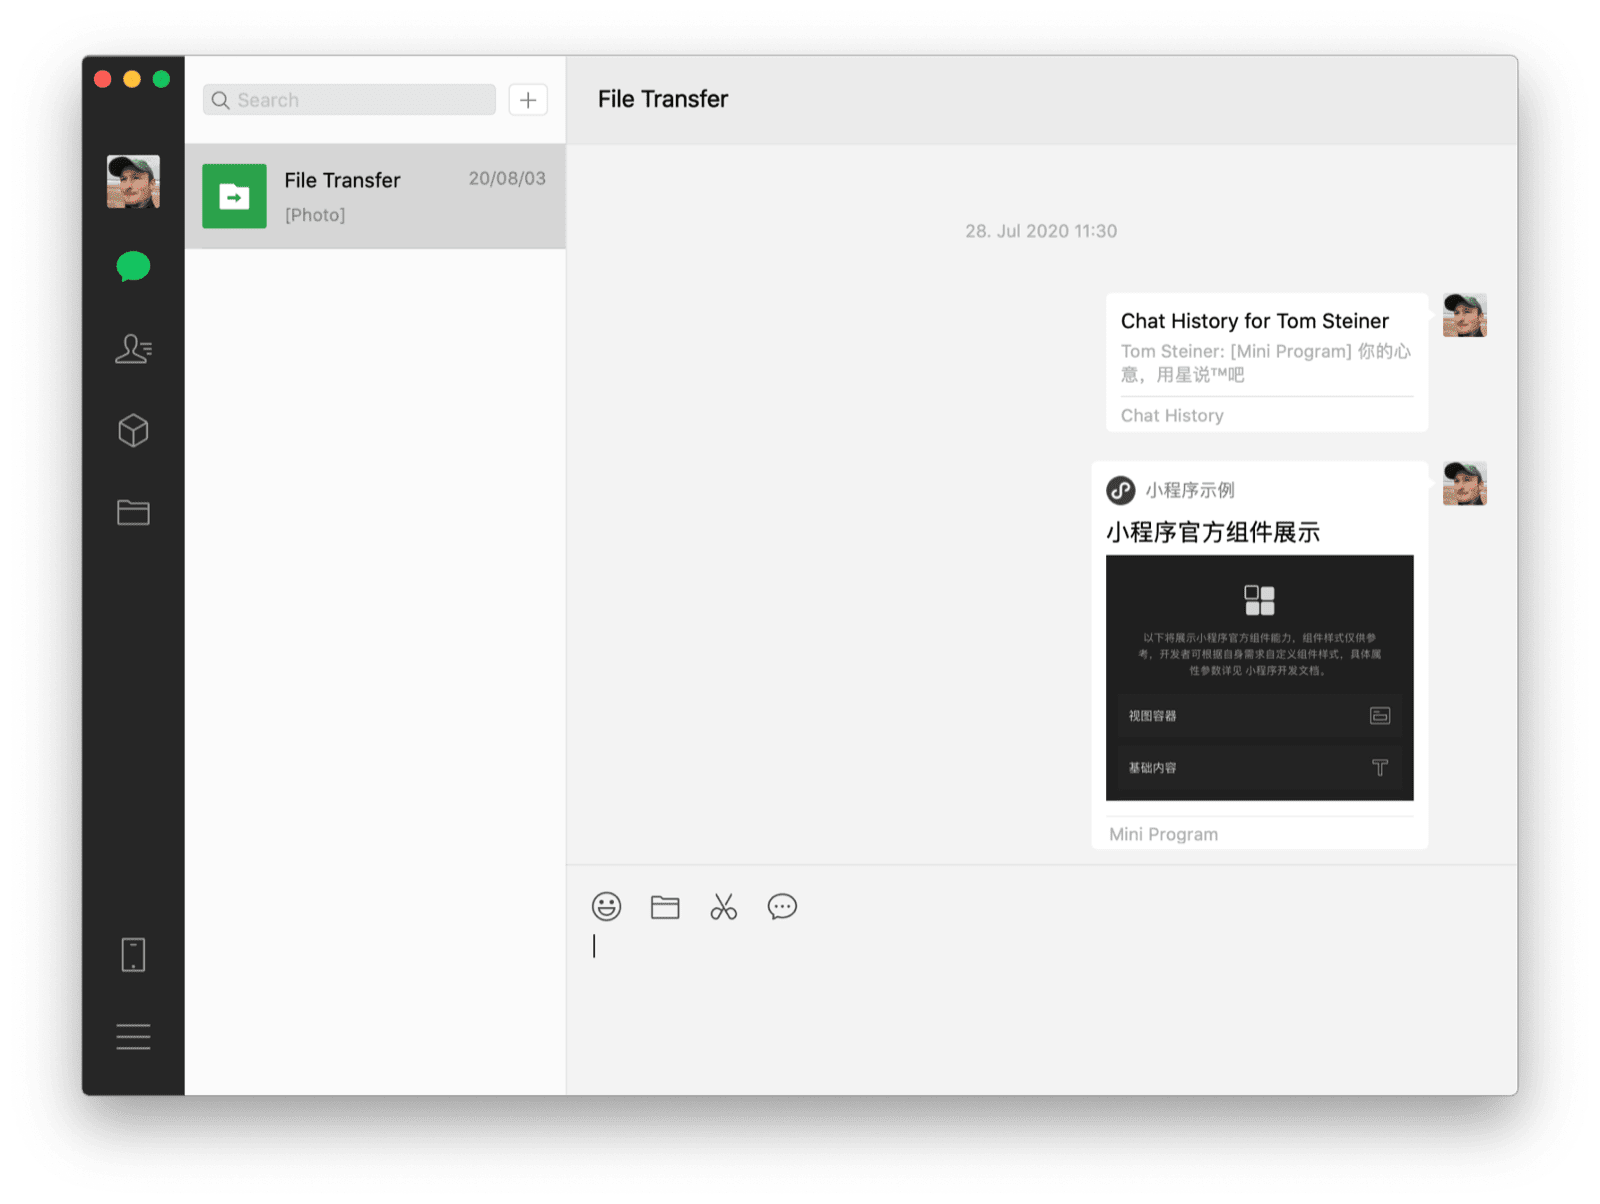 The WeChat macOS desktop client showing a chat with oneself with a shared mini app and a chat history as the two visible messages.